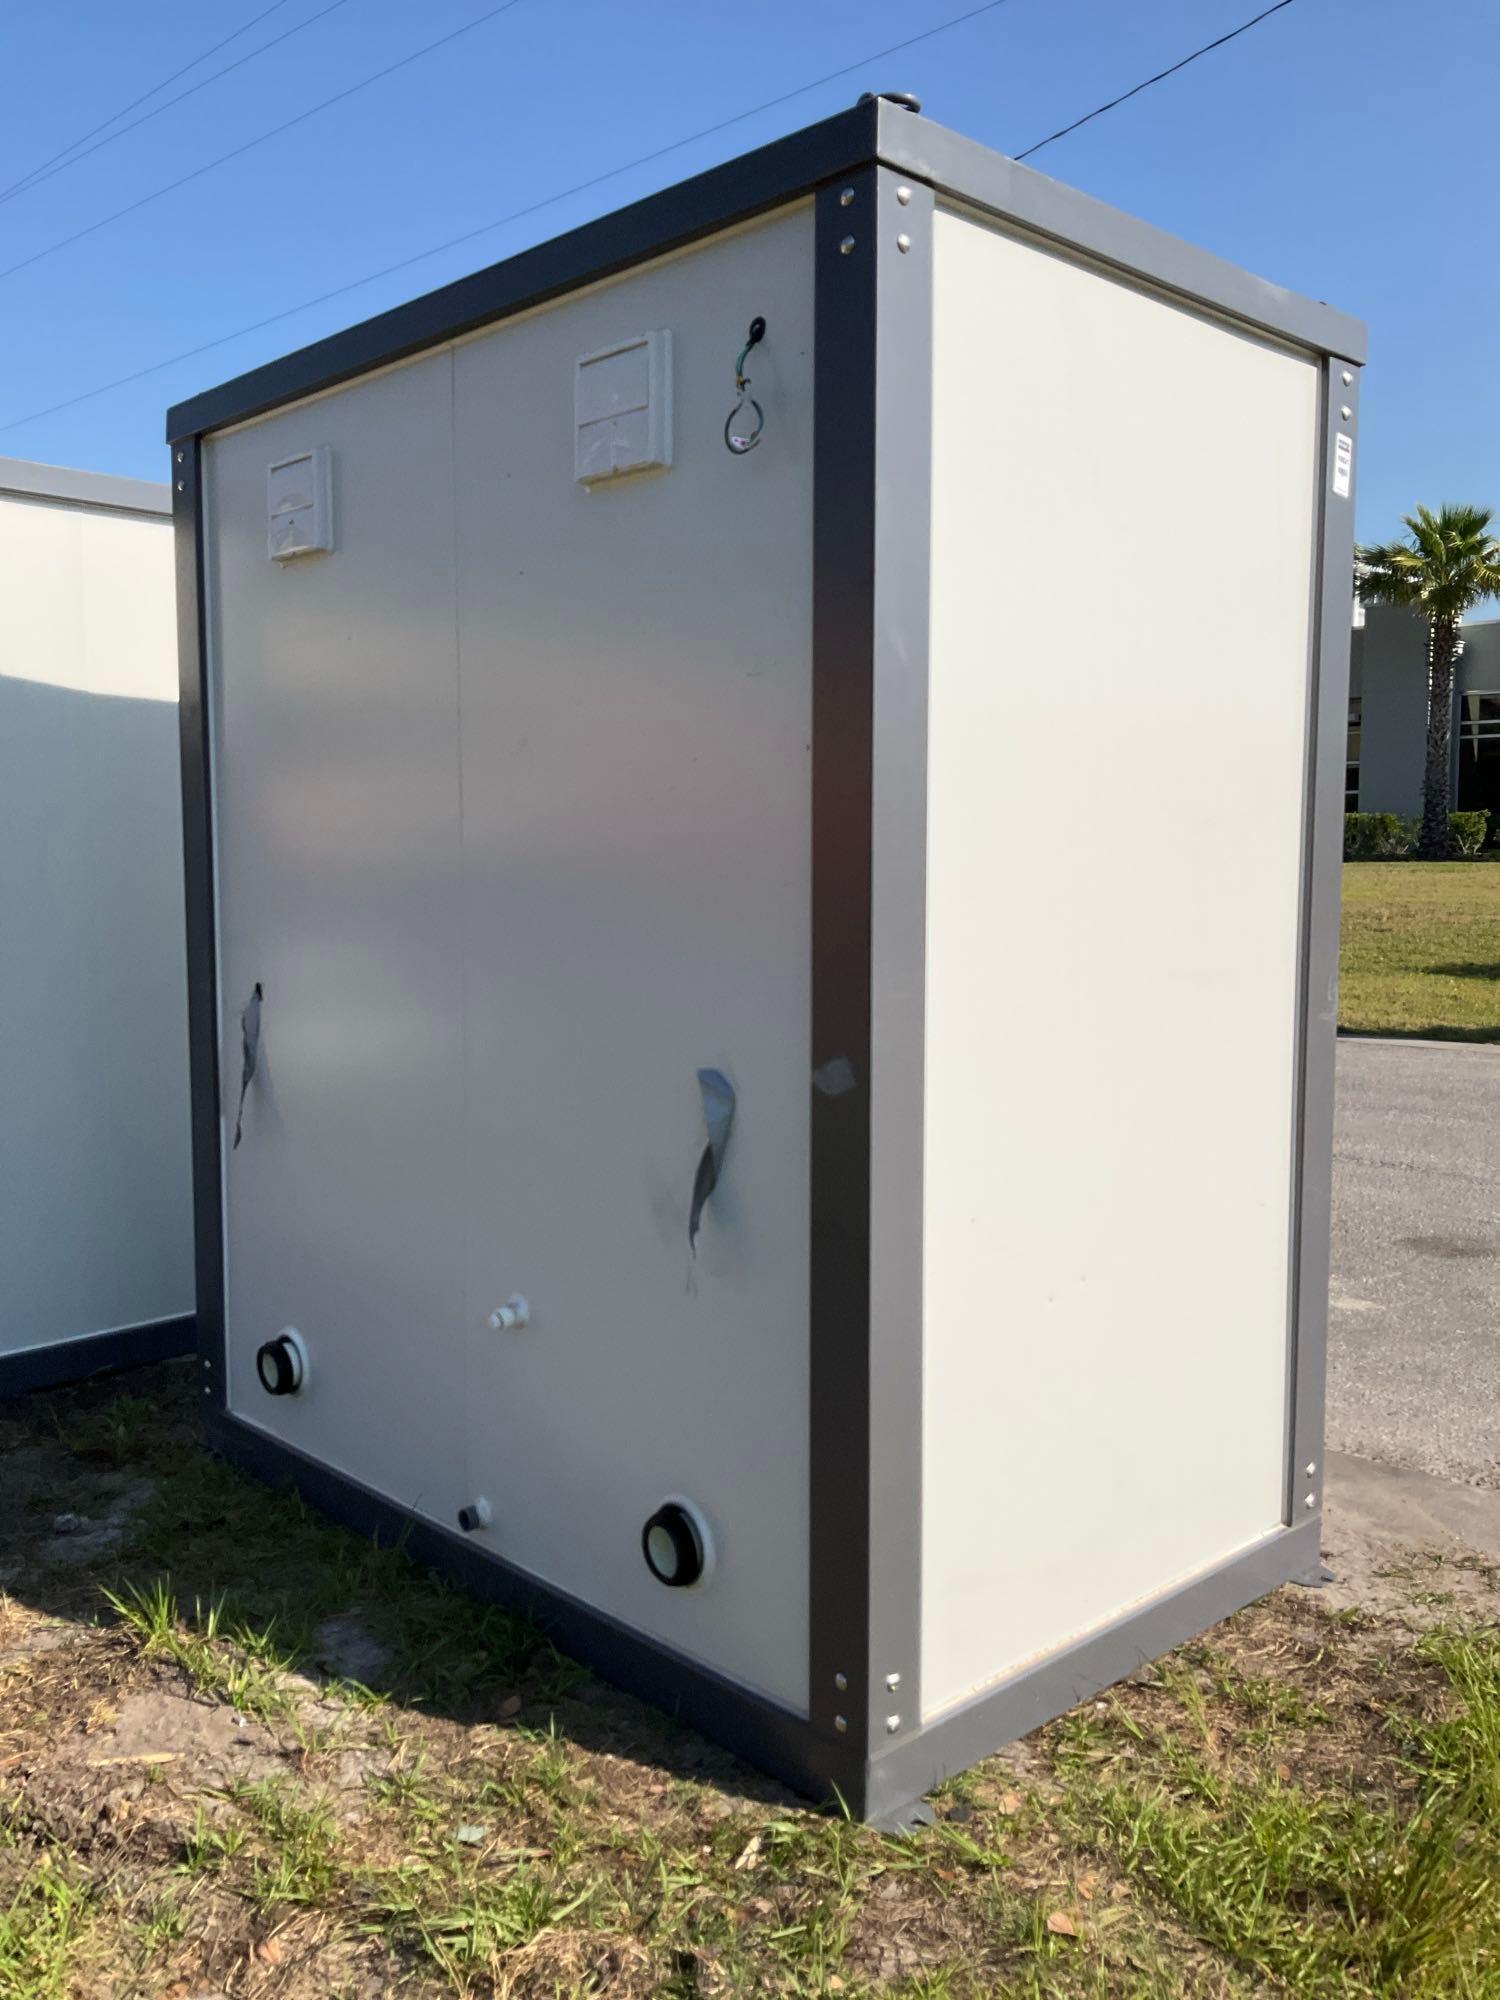 UNUSED PORTABLE DOUBLE BATHROOM UNIT, 2 STALLS, ELECTRIC & PLUMBING HOOK UP WITH EXTERIOR PLUMBING